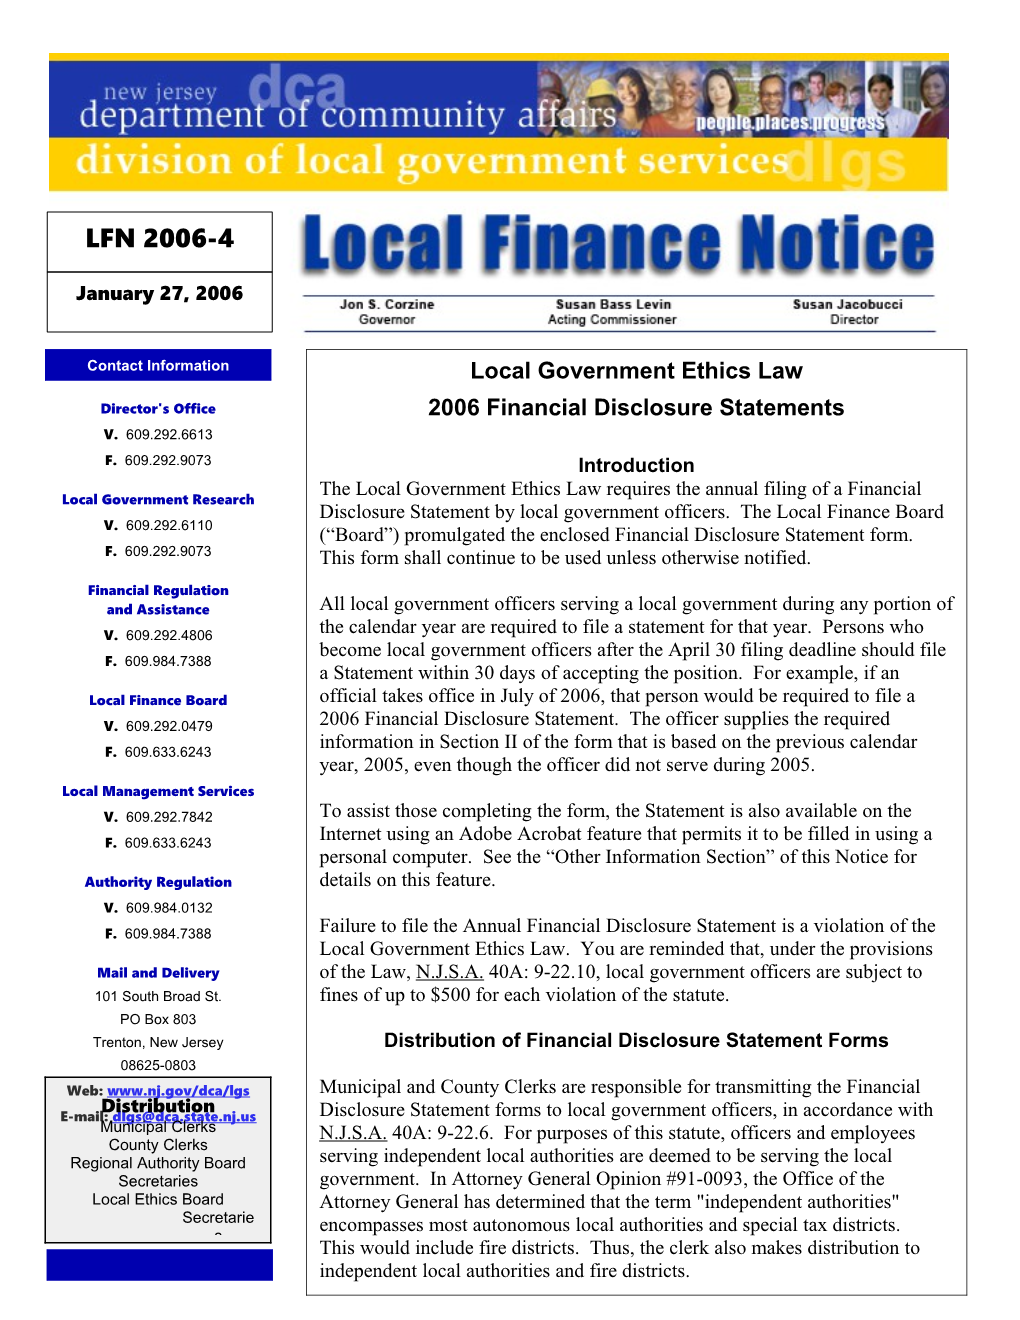 Local Finance Notice 2006-4January 27, 2006Page 1